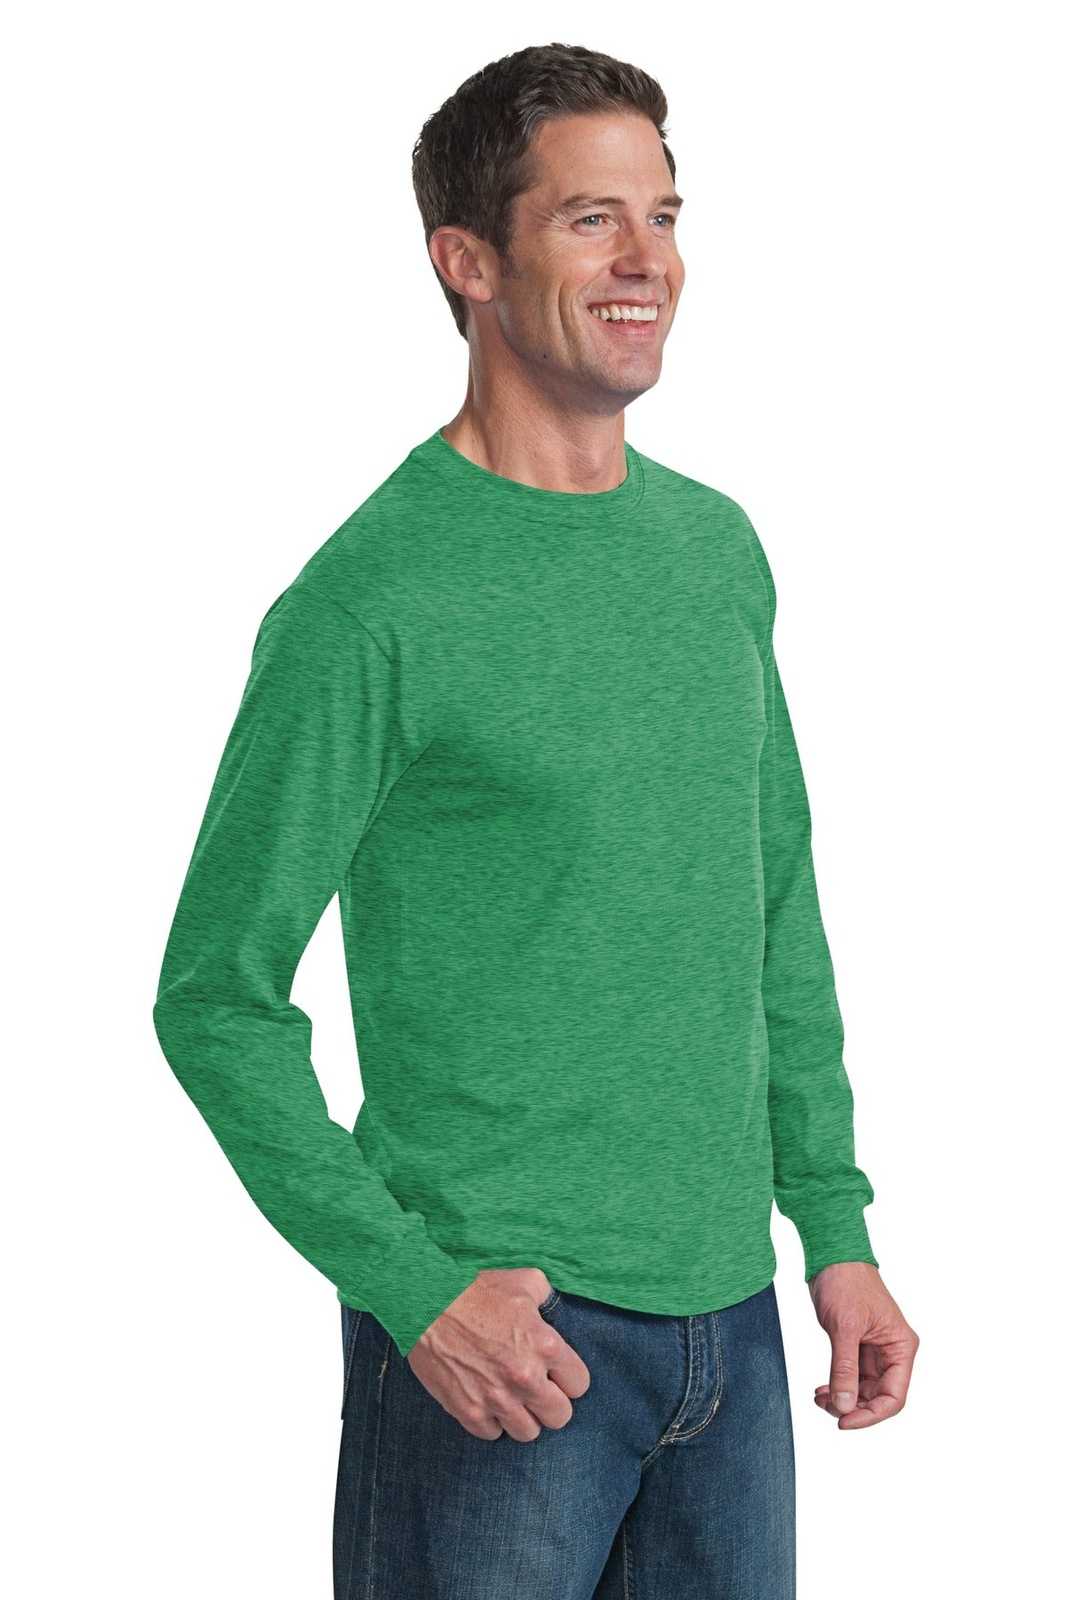 Fruit of the Loom 4930 HD Cotton 100% Cotton Long Sleeve T-Shirt - Retro Heather Green - HIT a Double